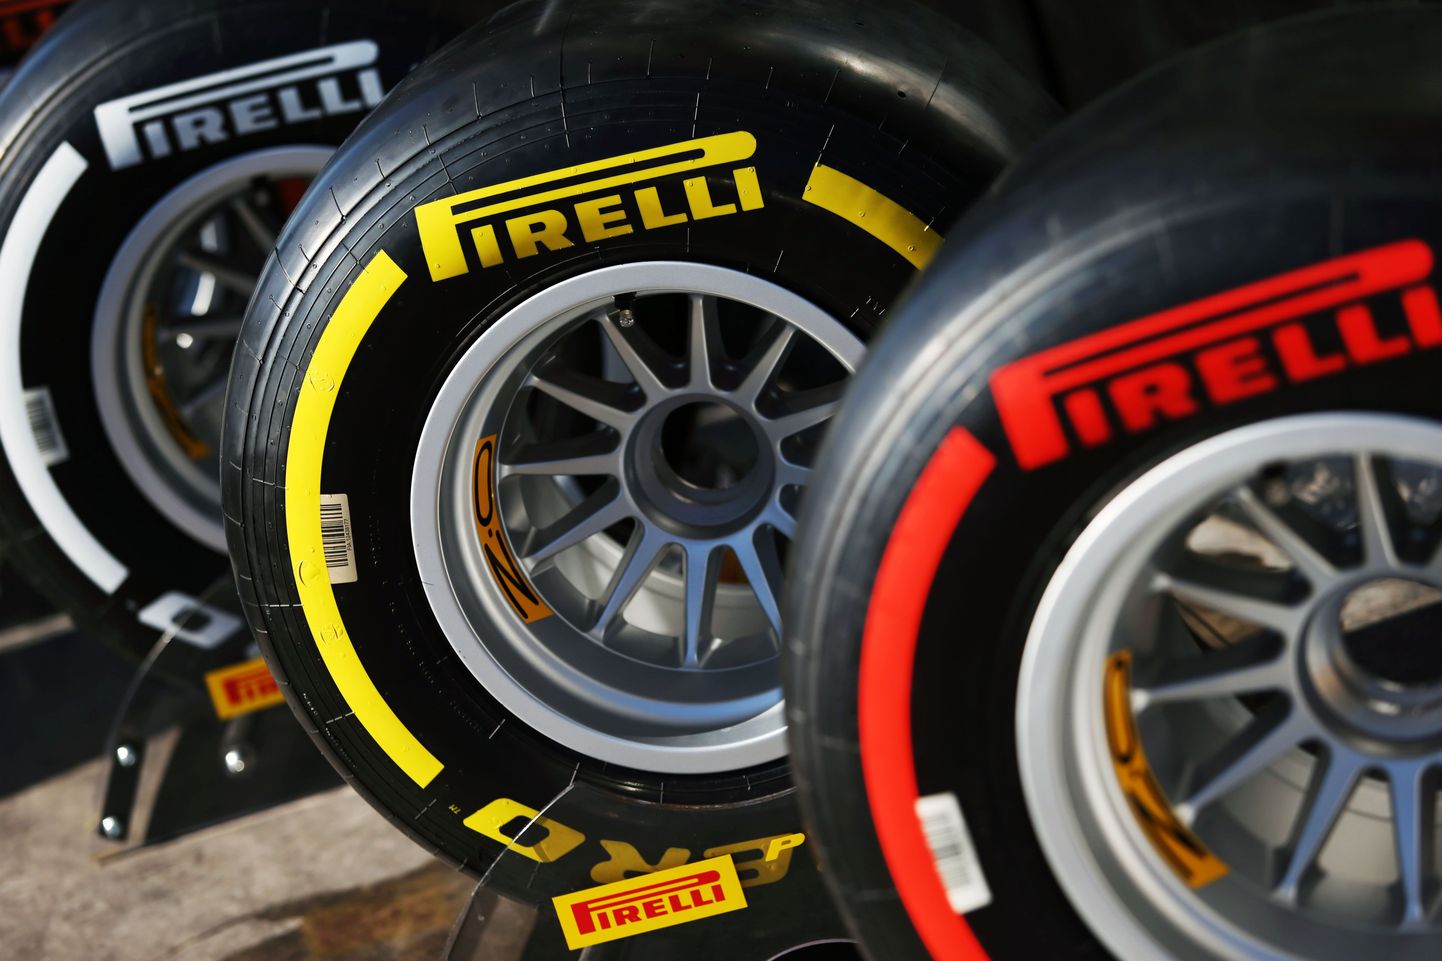 Pirelli tyres.
Formula One Testing, Day 2, Wednesday 2nd March 2016. Barcelona, Spain.